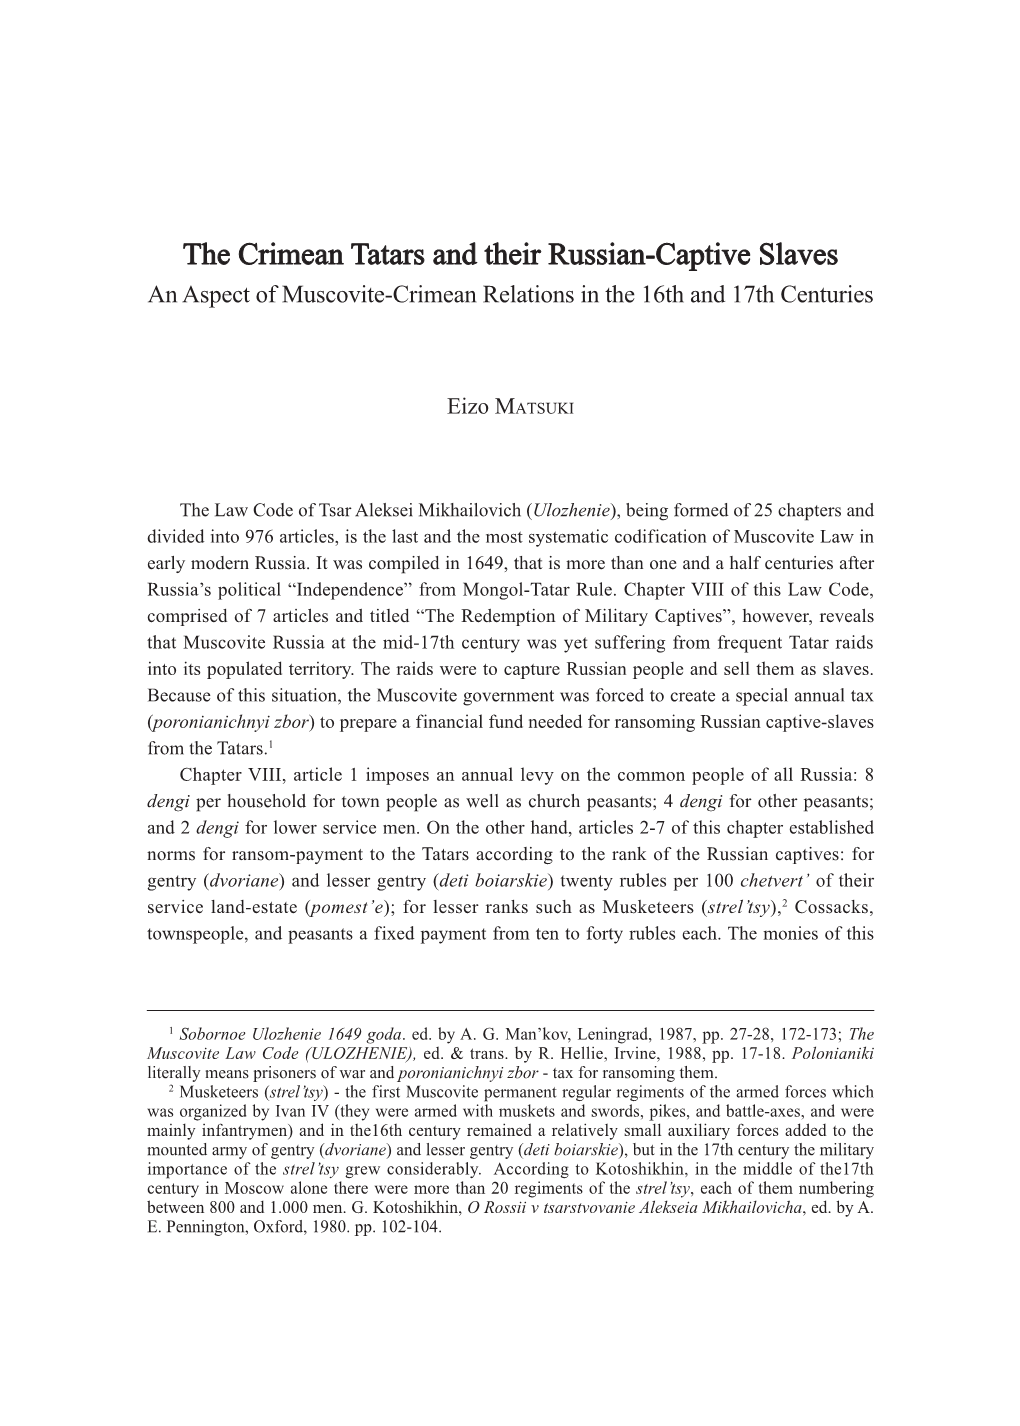 The Crimean Tatars and Their Russian-Captive Slaves an Aspect of Muscovite-Crimean Relations in the 16Th and 17Th Centuries